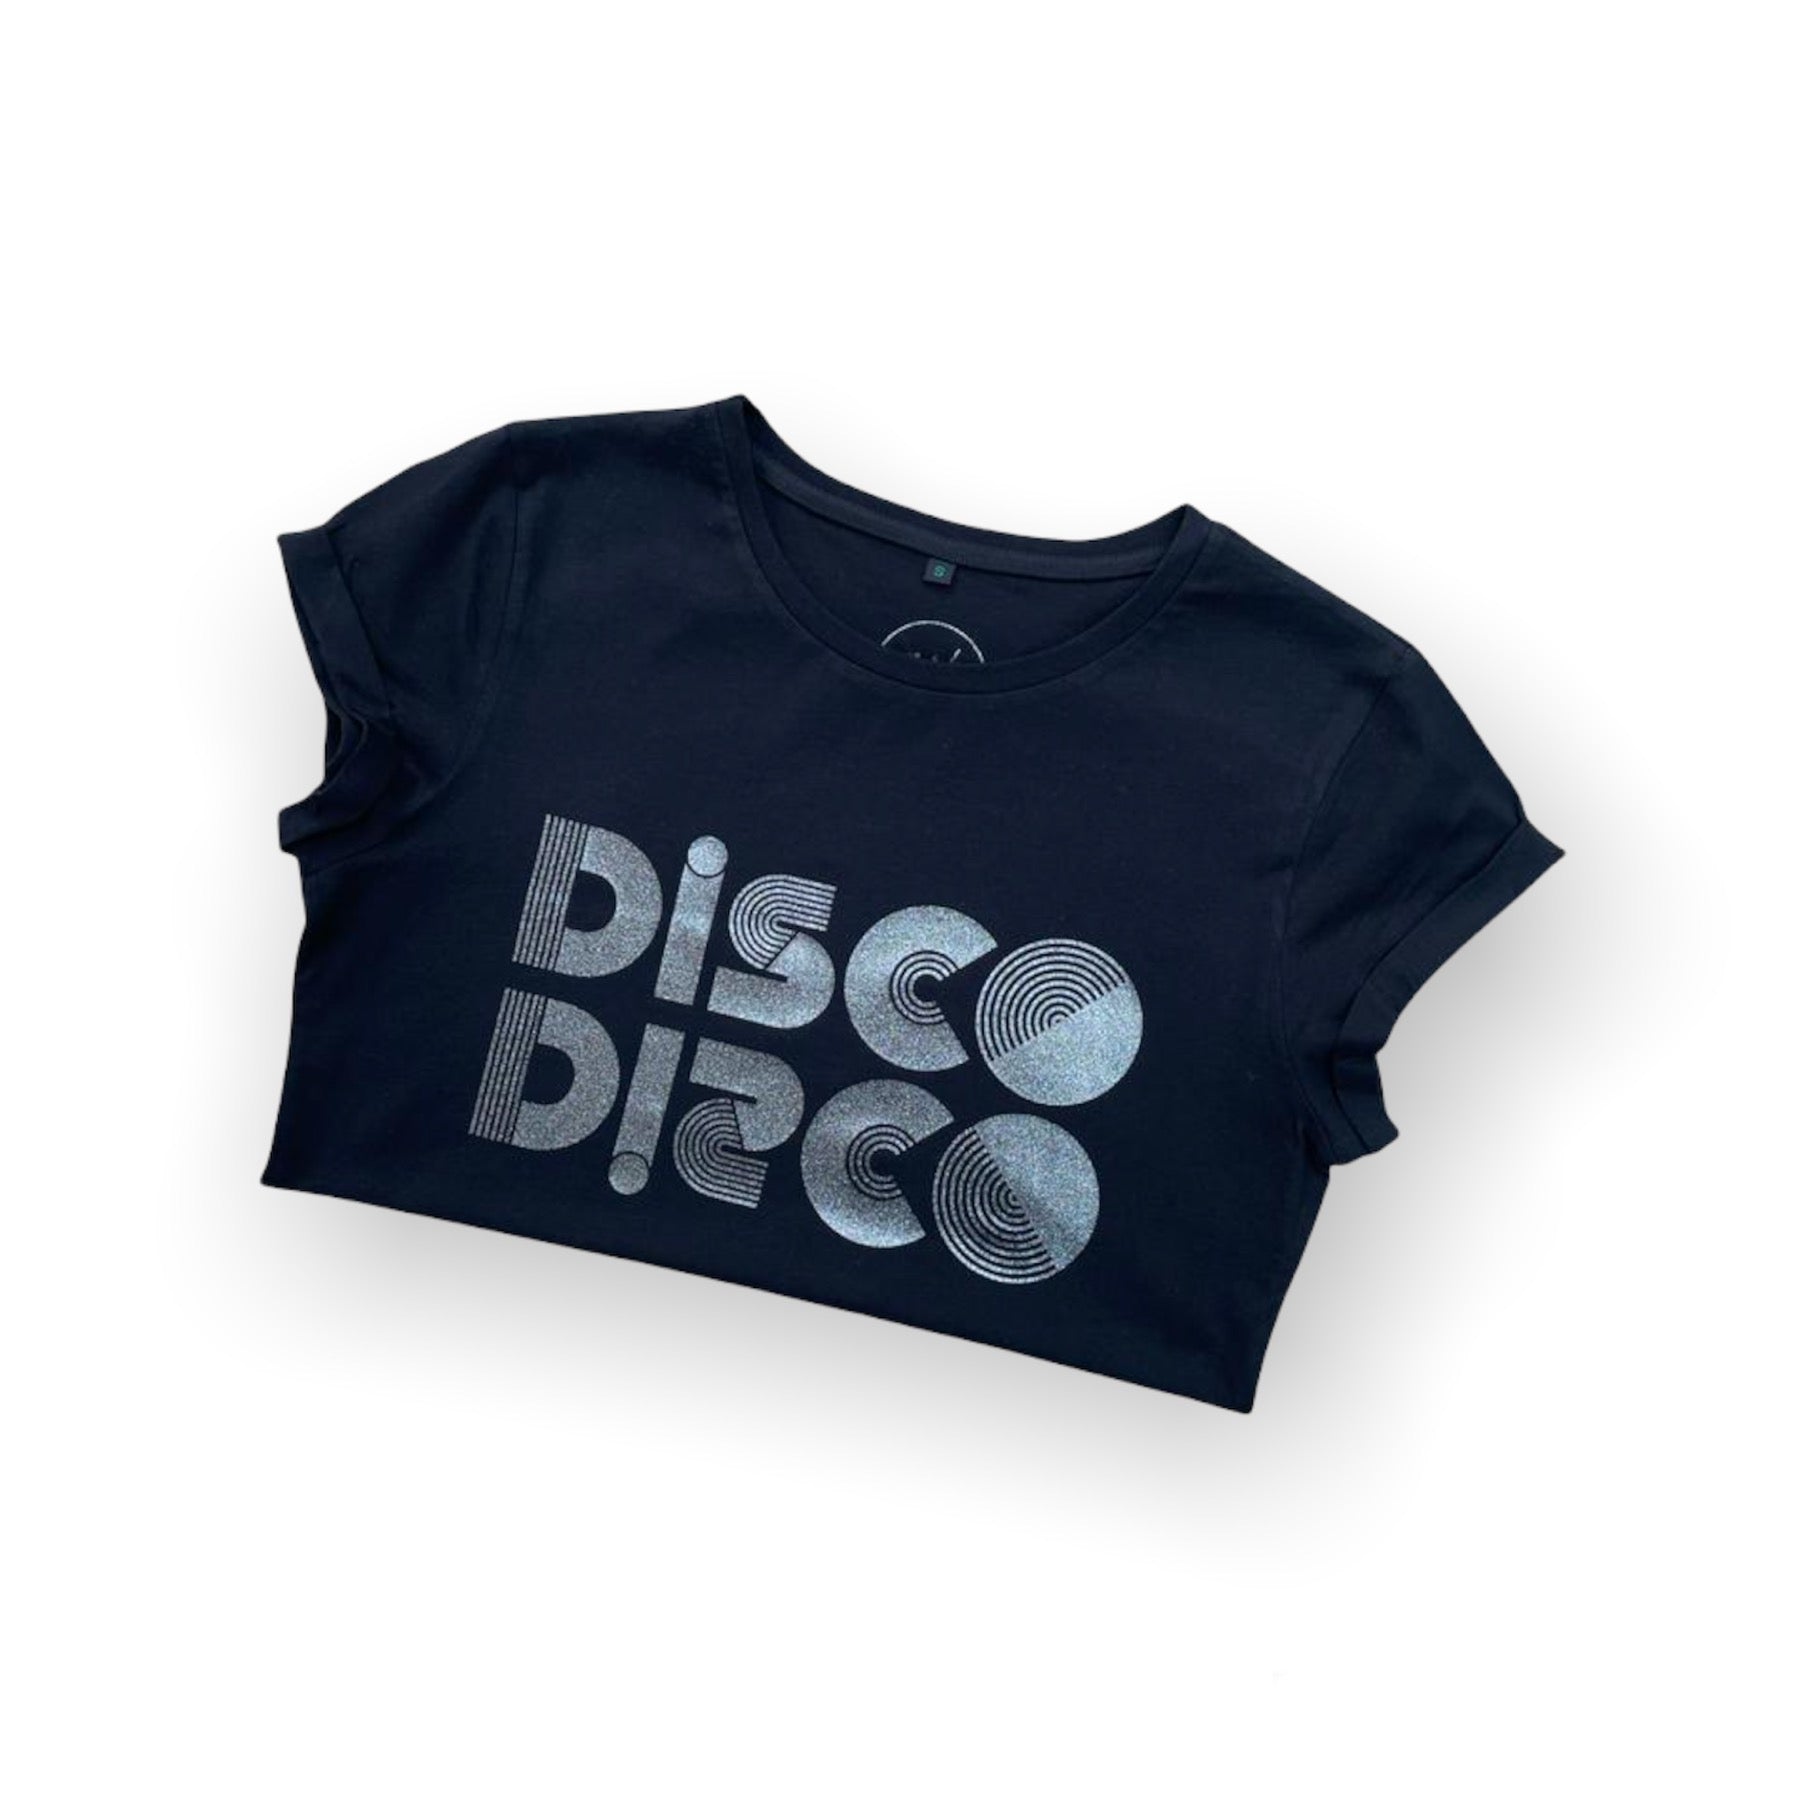 The Black and Silver Disco Ladies T-Shirt